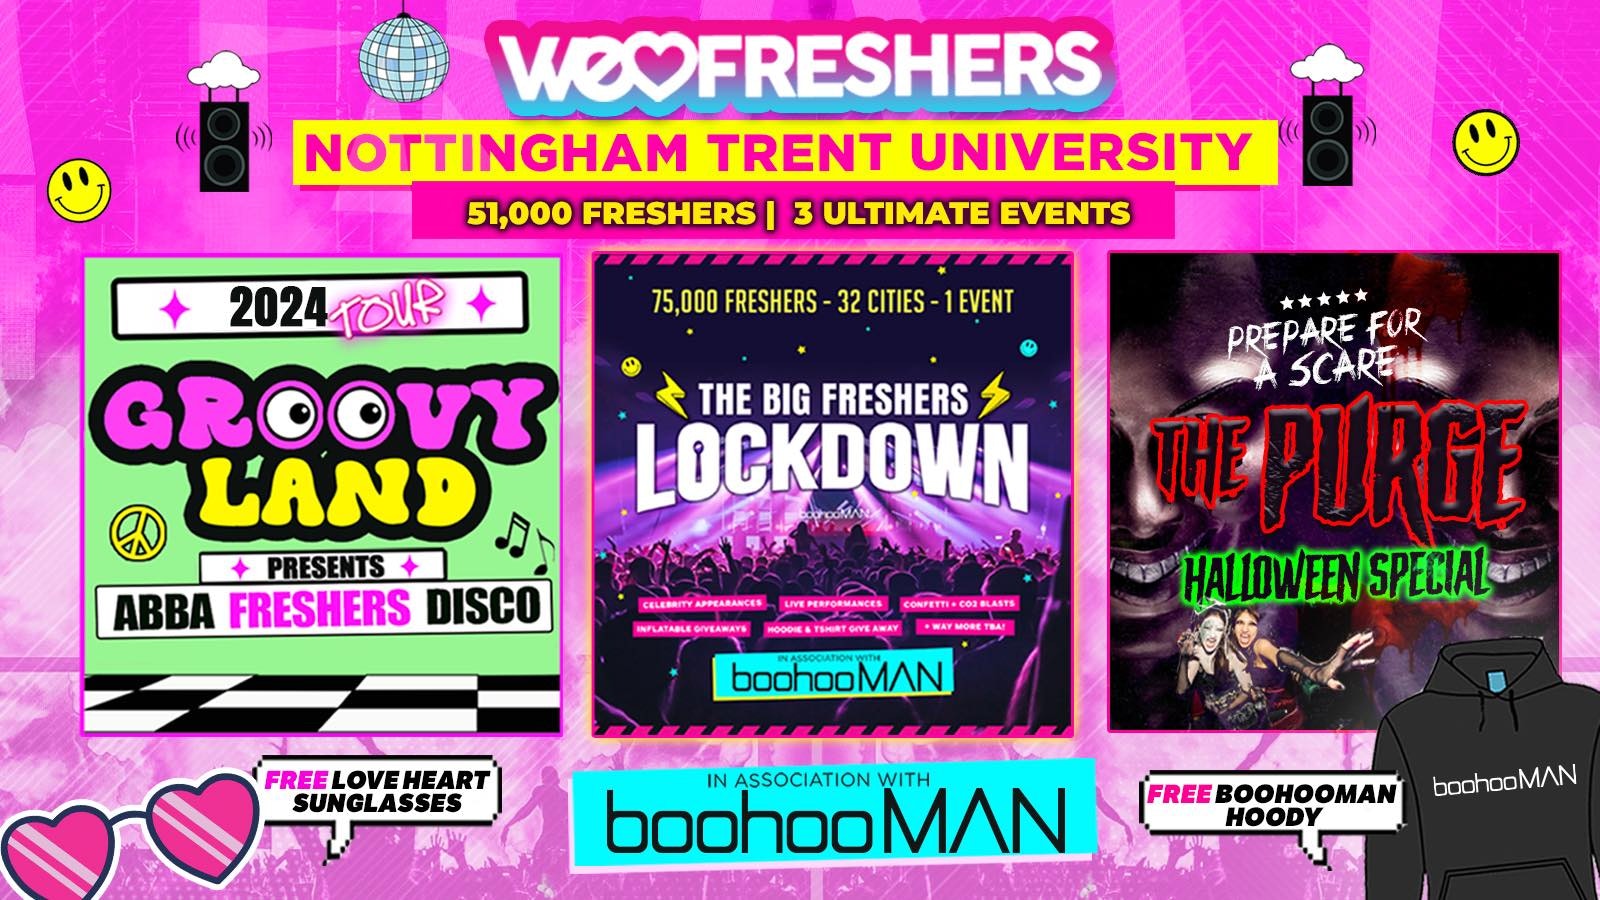 WE LOVE NOTTINGHAM NTU FRESHERS 2024 in association with boohooMAN – ❗FREE BOOHOOMAN HOODIE TODAY ONLY❗